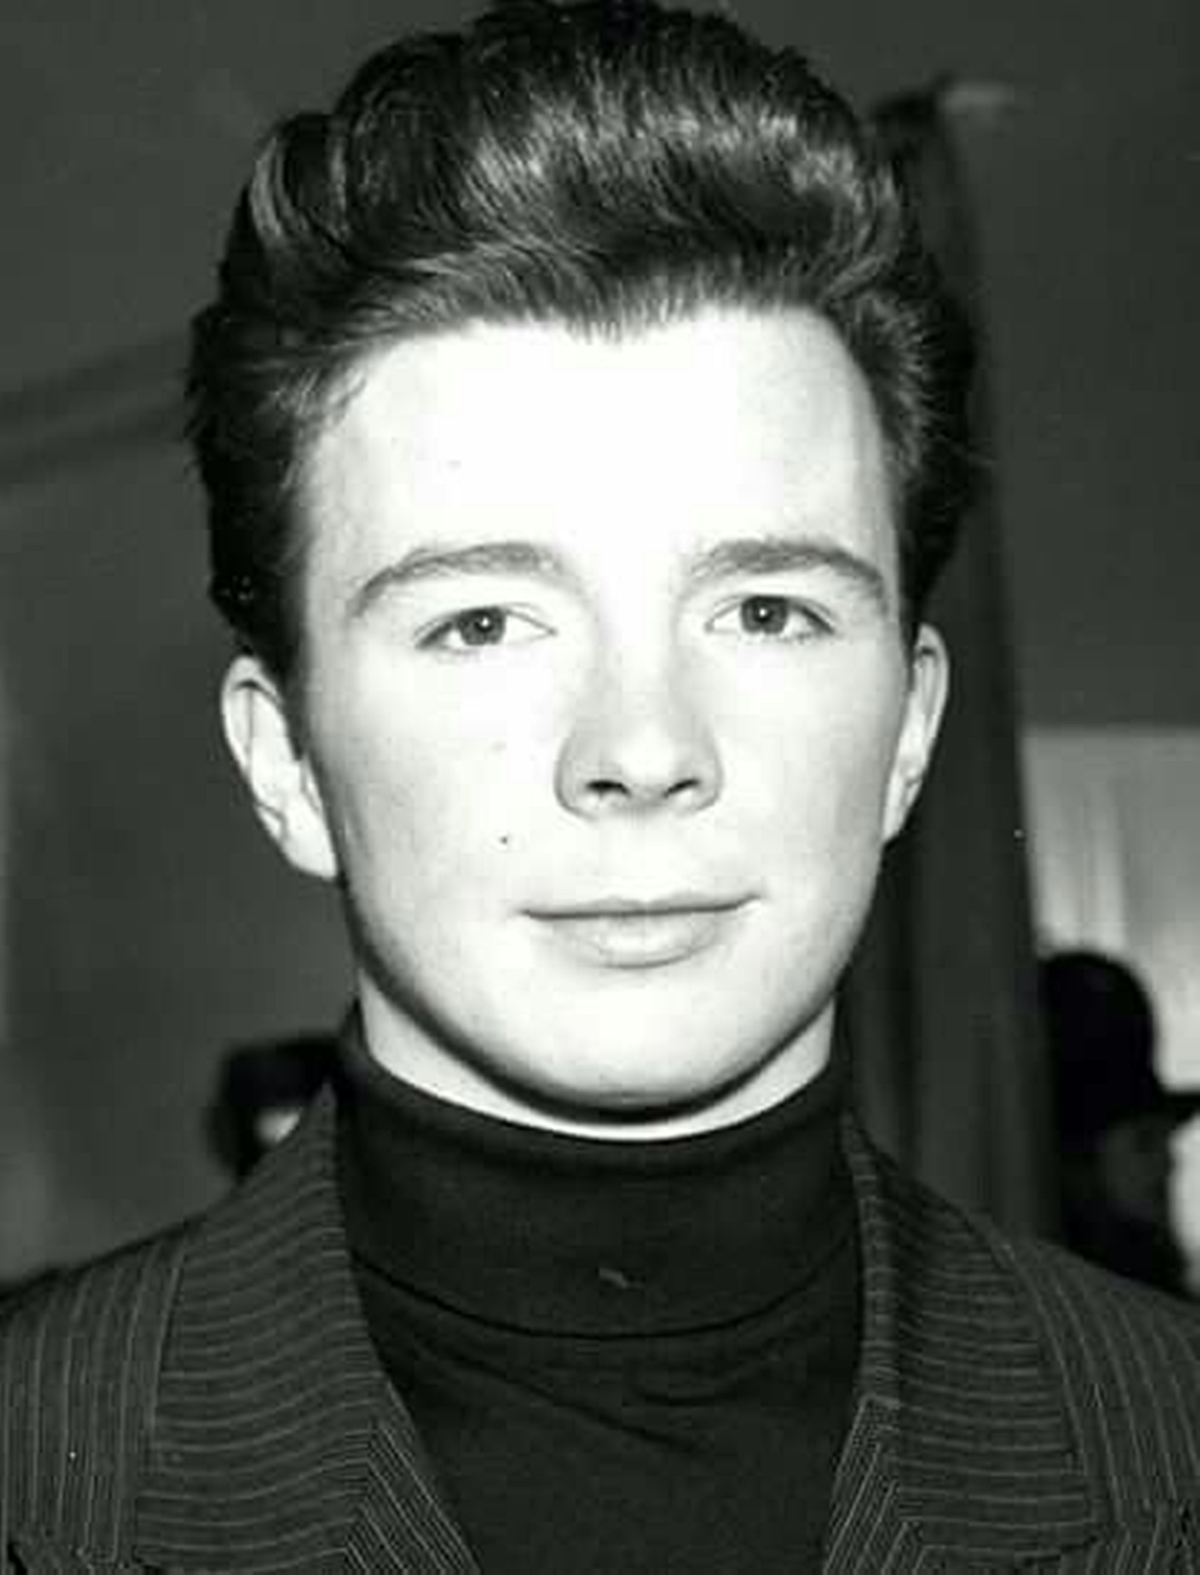 A black and white photo of Astley in the 80s